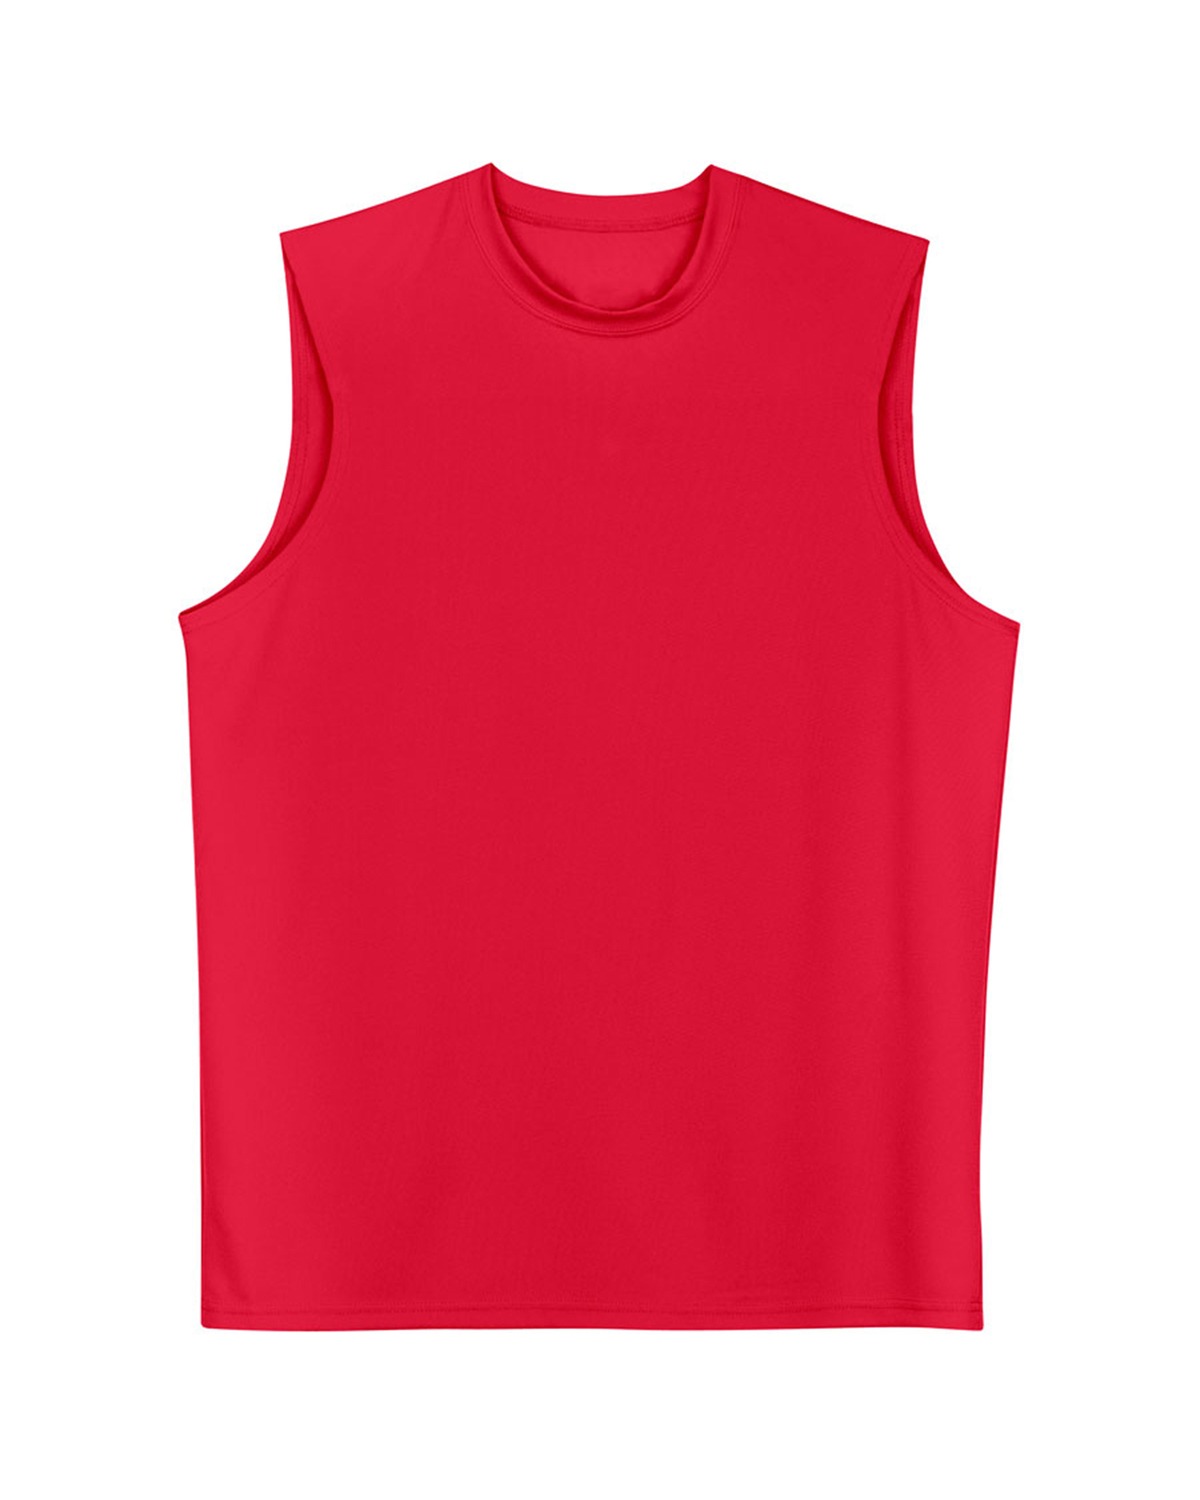 A4 N2295 - Adult Cooling Performance Muscle Tee $5.95 - T-Shirts